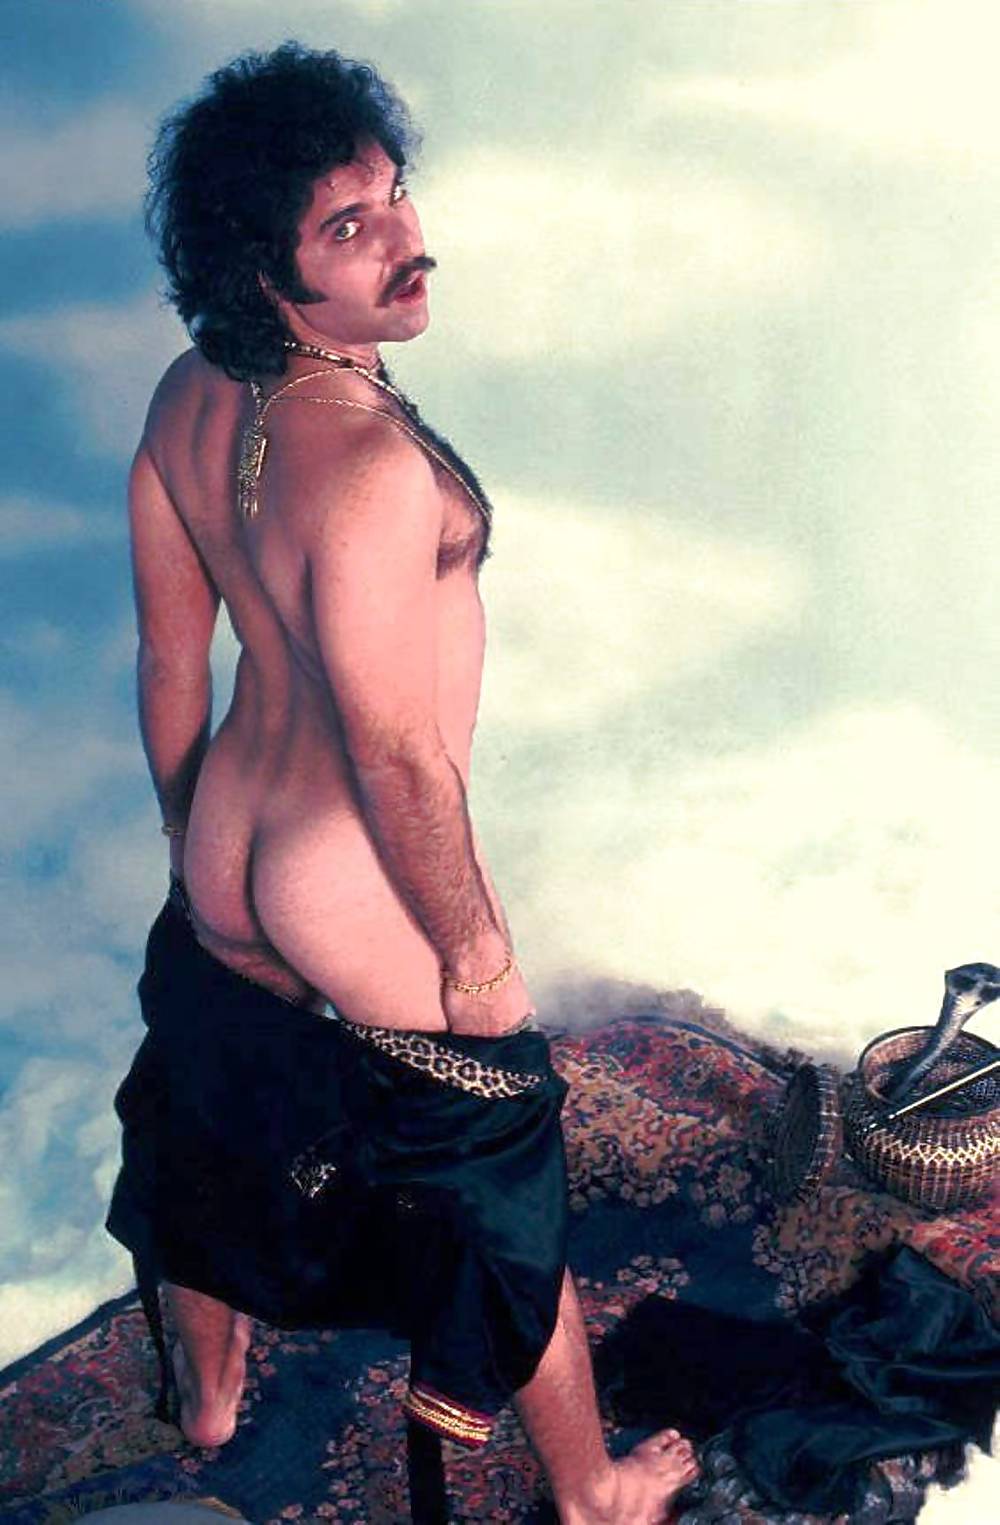 Ron Jeremy as we rarely see him #1703204